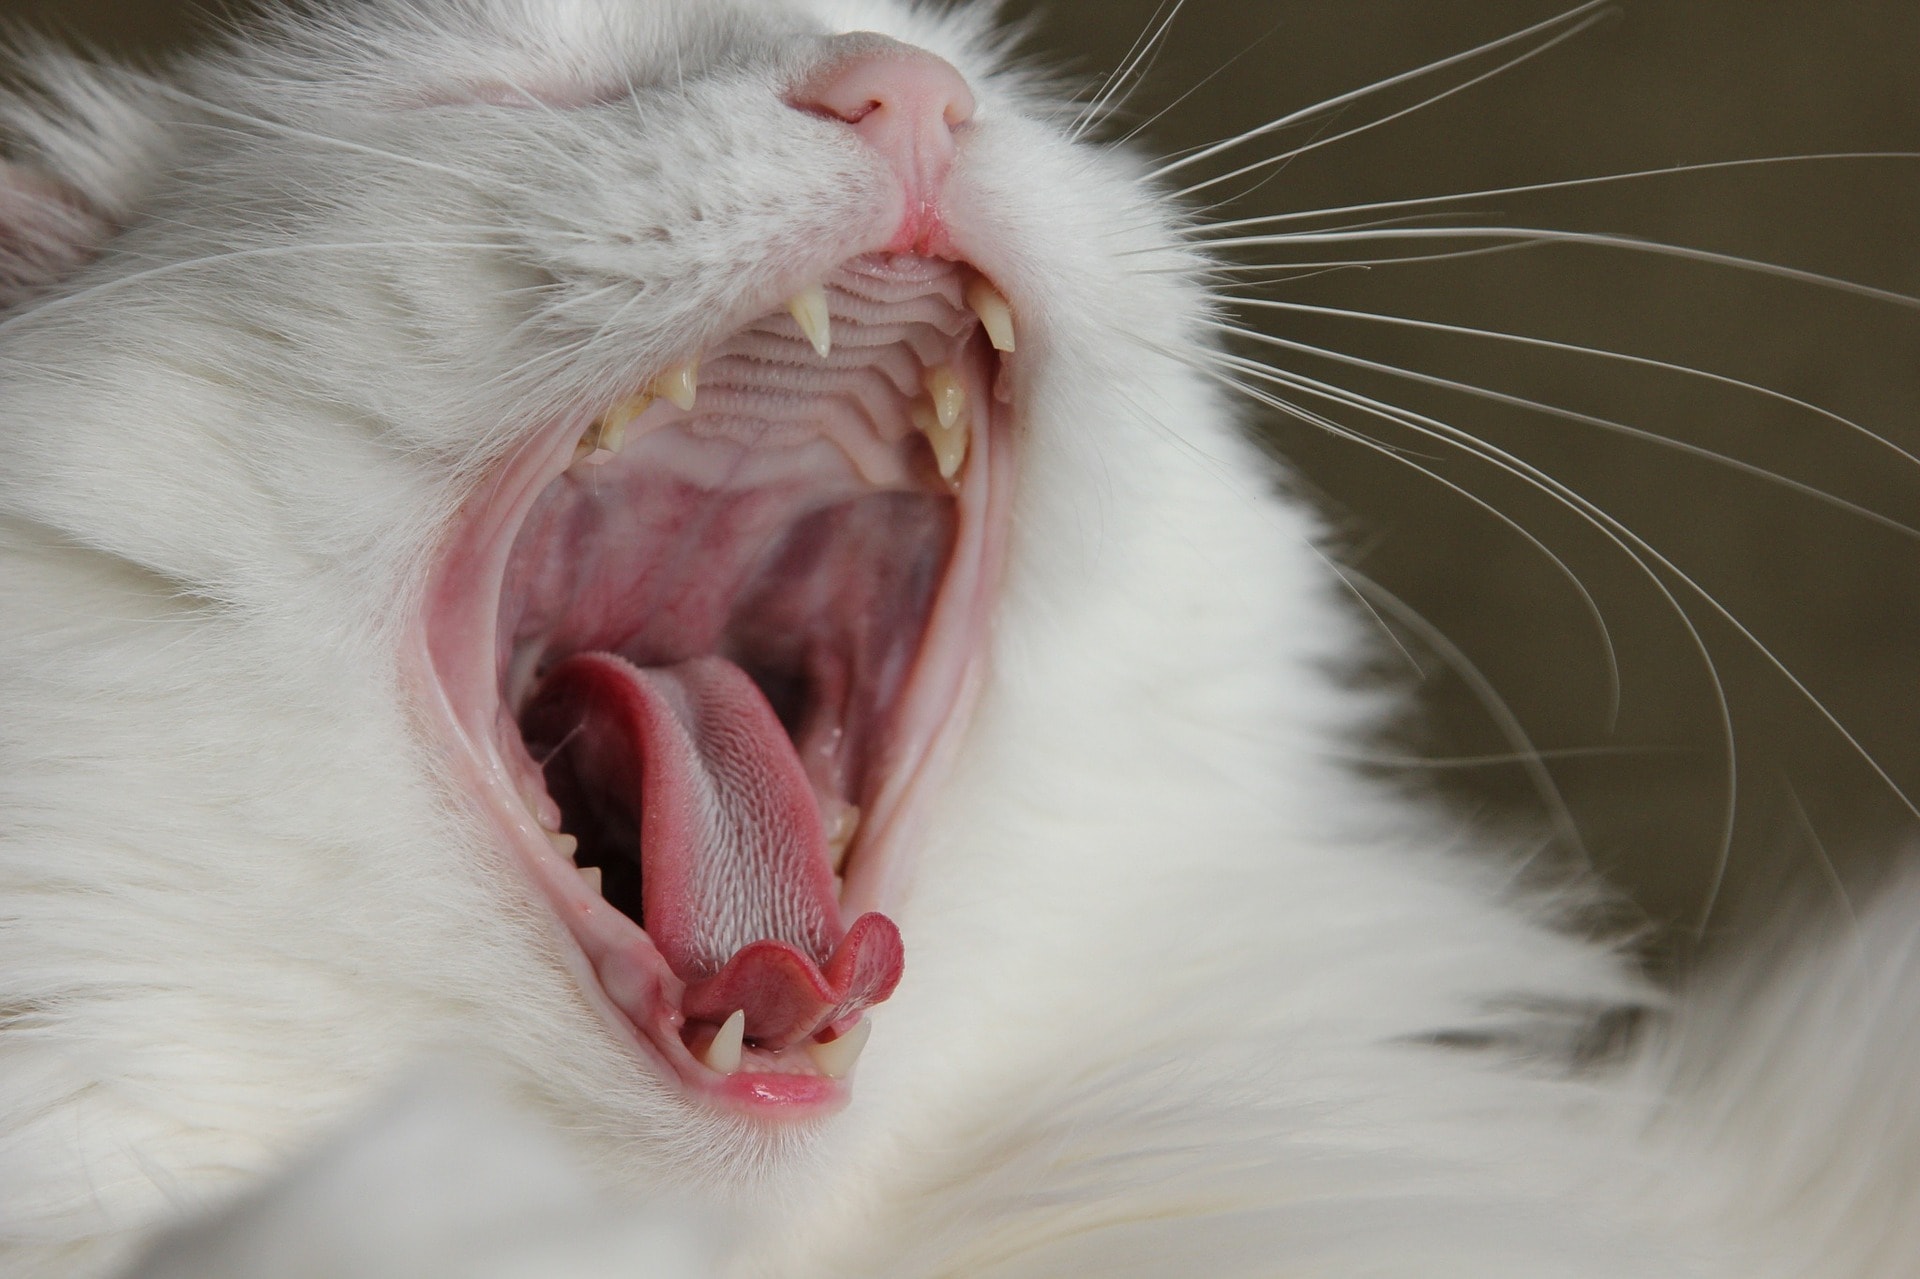 Cat Bad Breath: Causes and Natural Remedies for Bad Breath in Cats